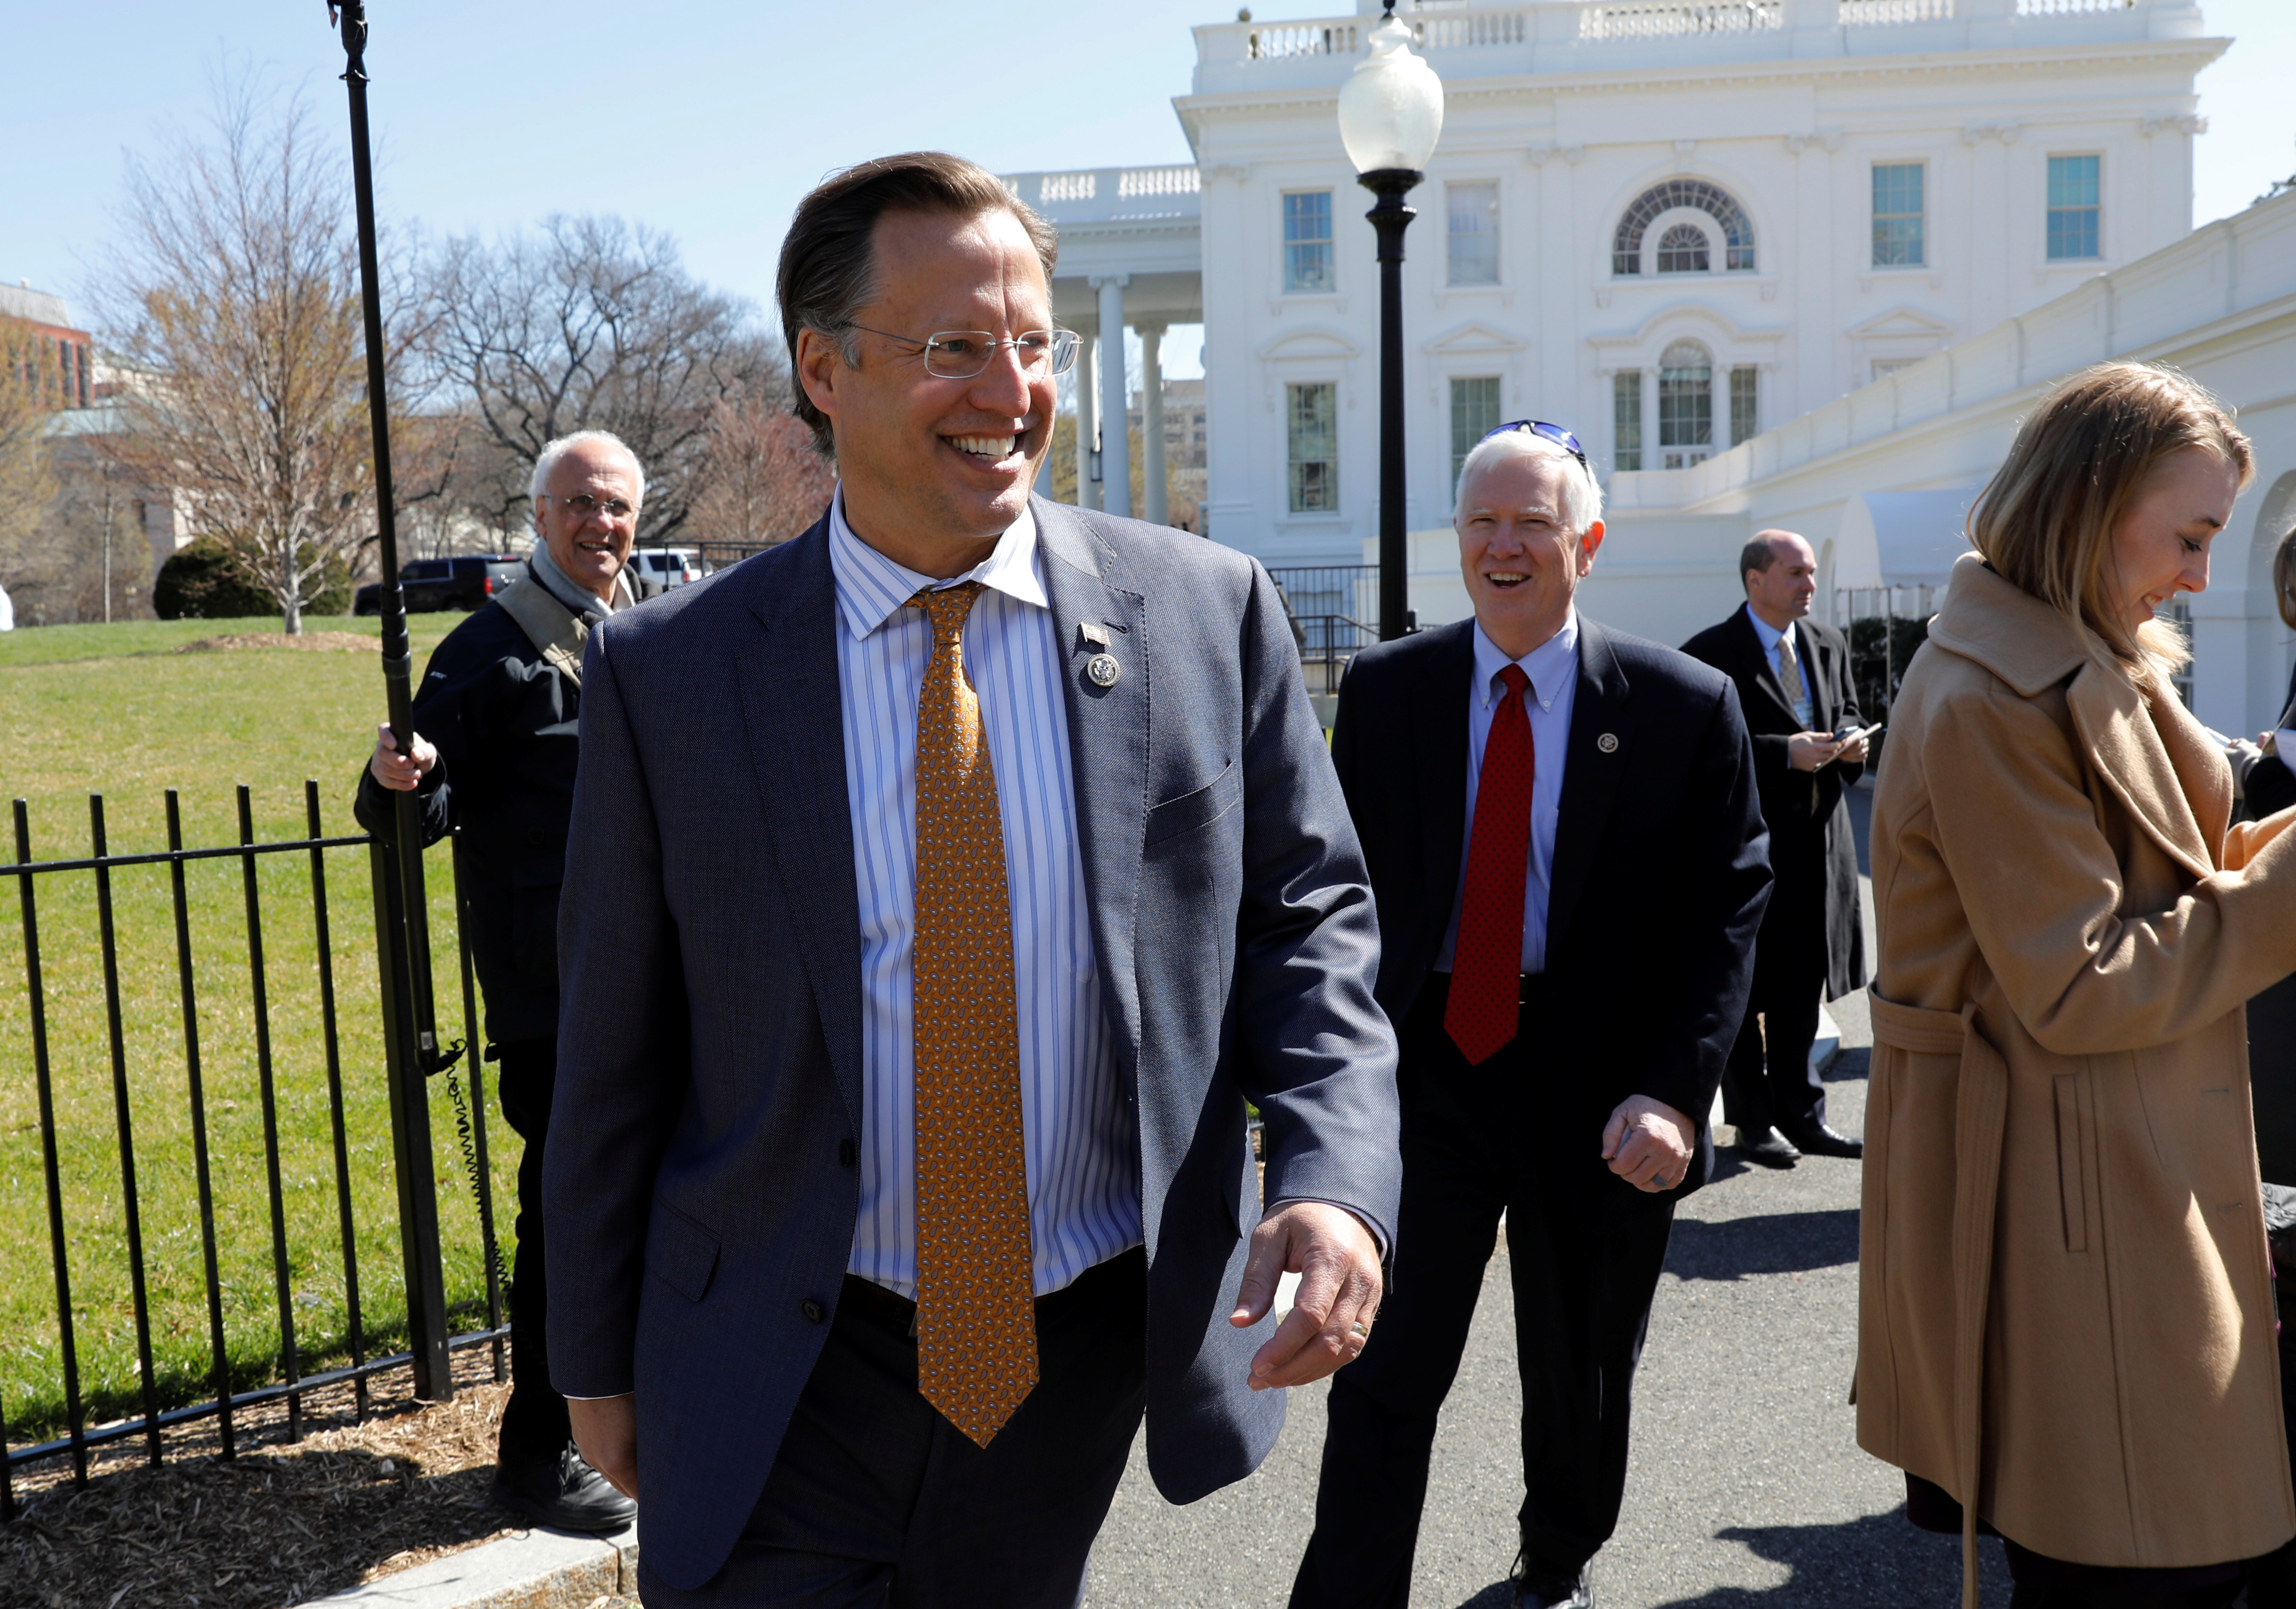 Rep. Dave Brat (R-VA) arrives for a House Freedom Caucus meeting with U.S. President Donald Trump on the plan to replace Obamacare at the White House in Washington, U.S., March 23, 2017. REUTERS/Kevin Lamarque